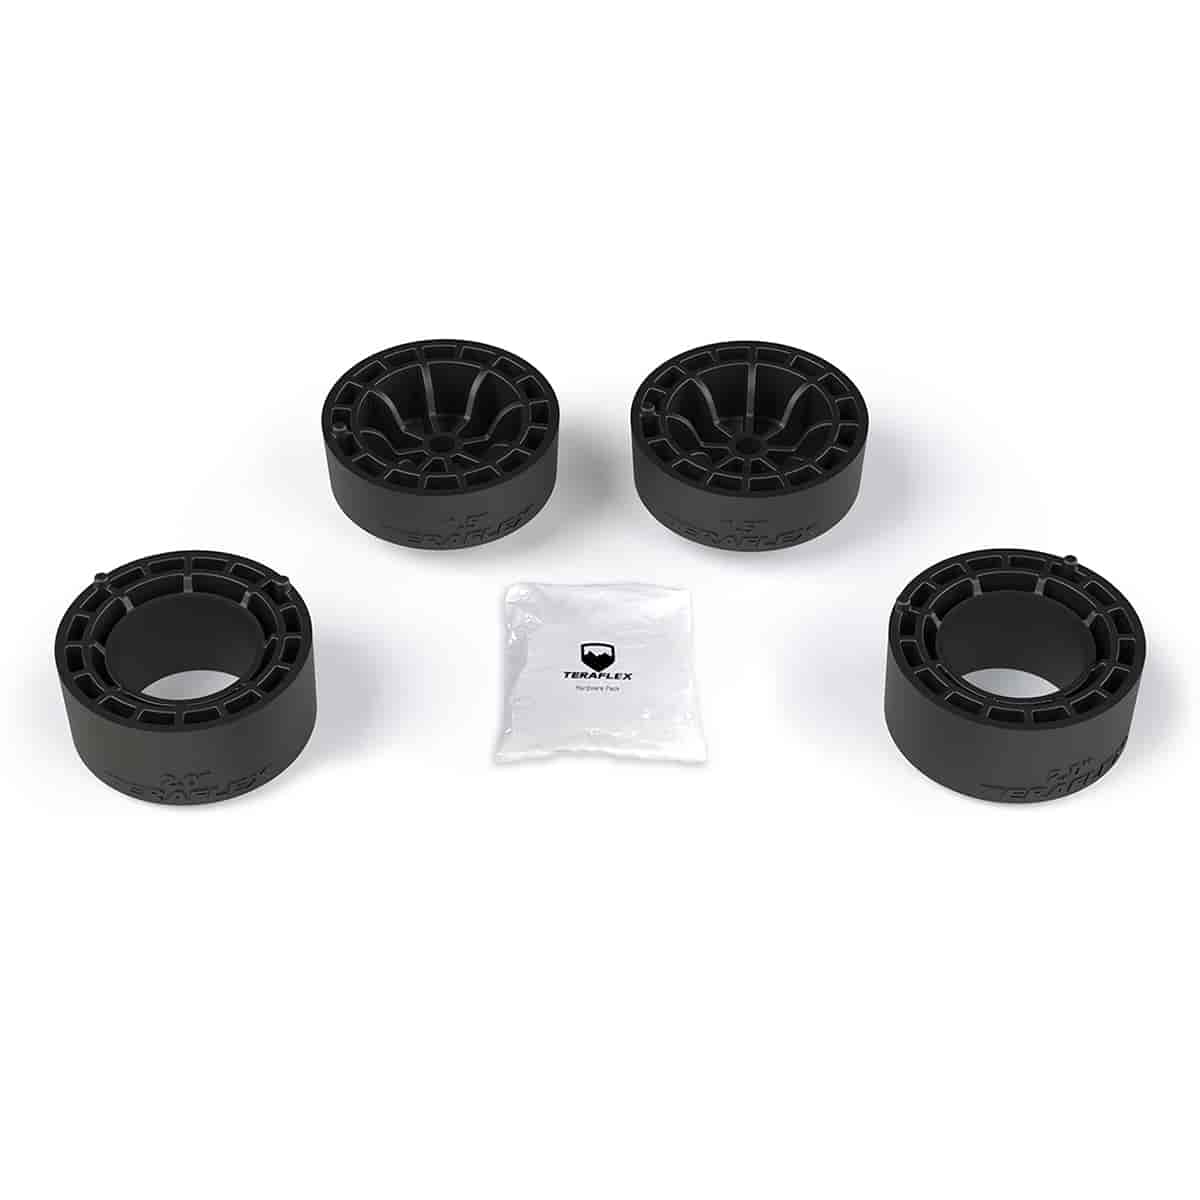 1.500 in. Spacer Lift Kit for Jeep Wrangler JL Unlimited